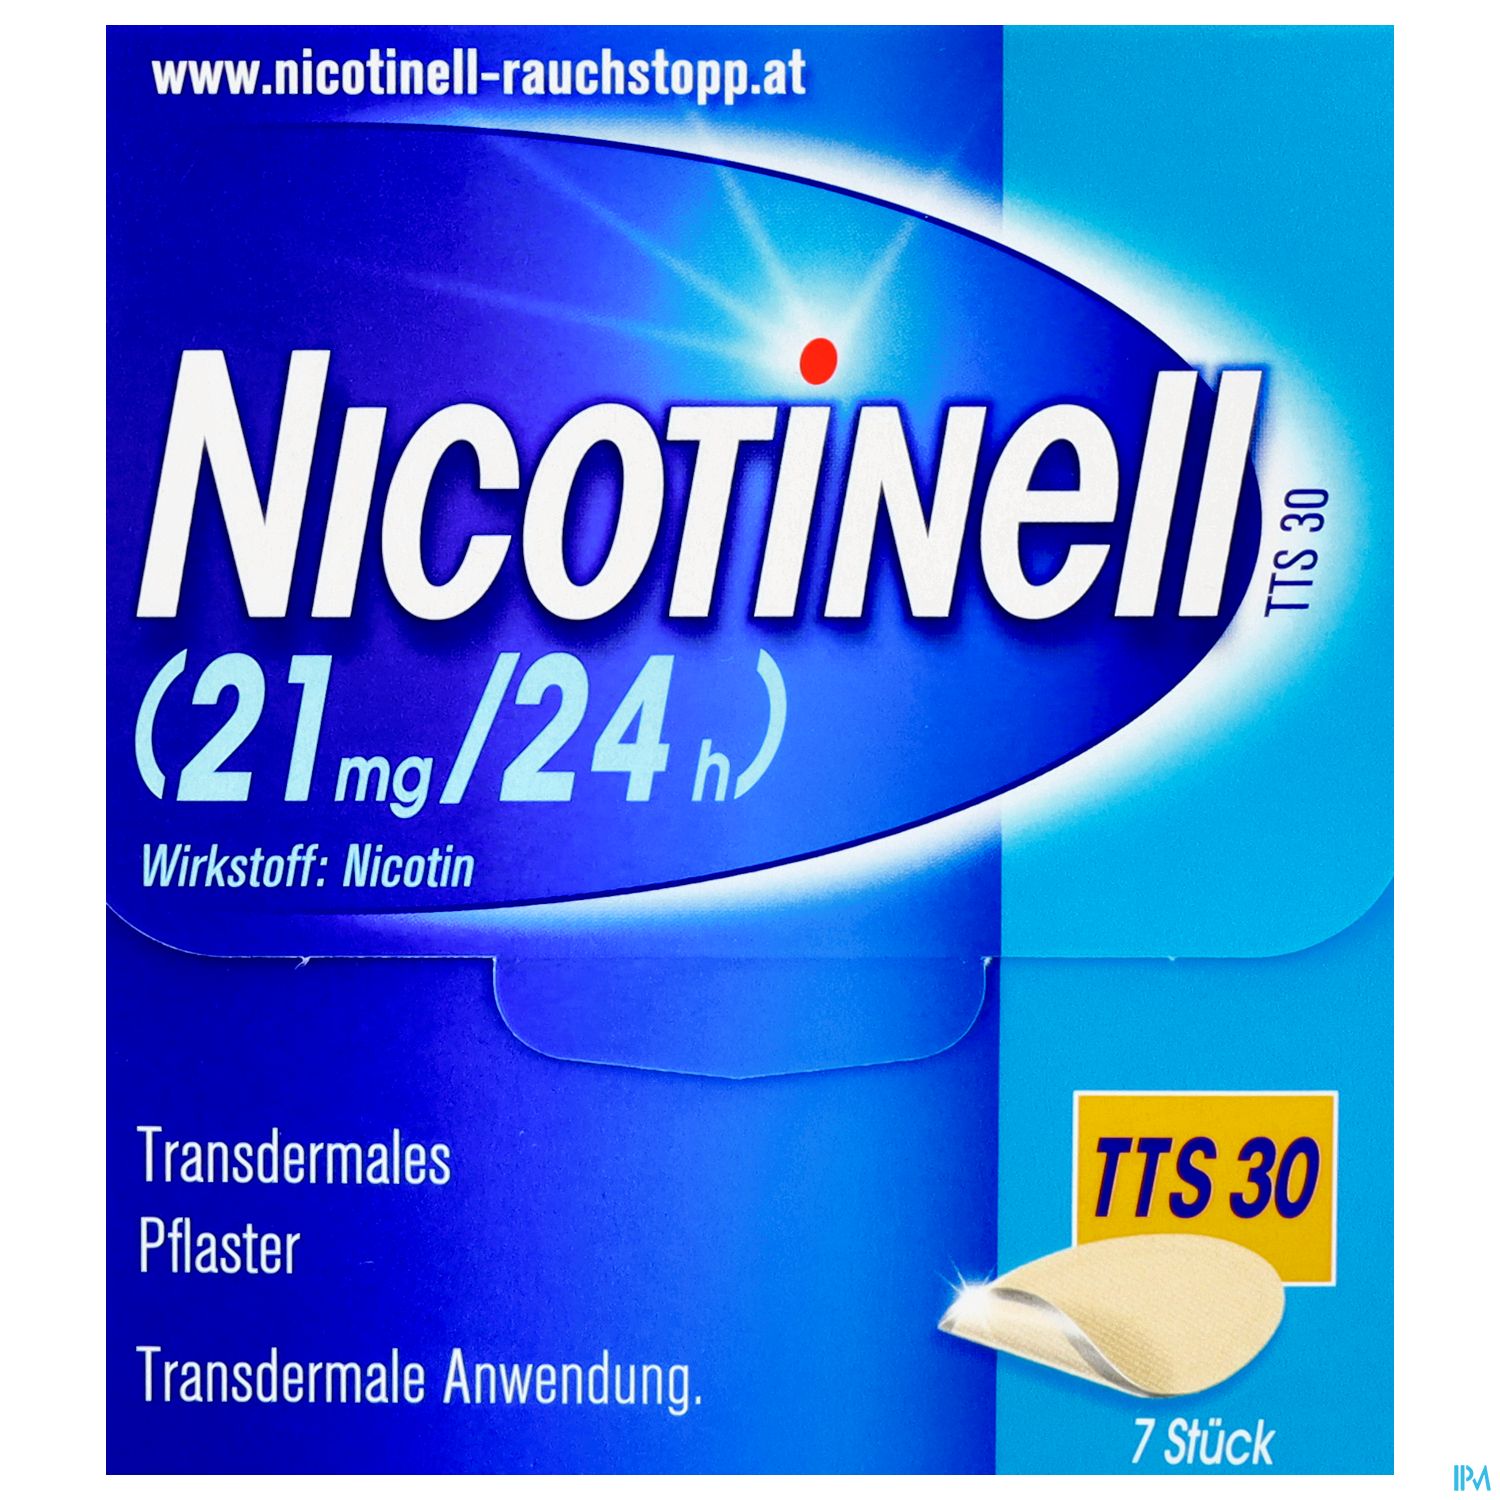 Nicotinell TTS 30 (21 mg/24 h) - transdermale Pflaster